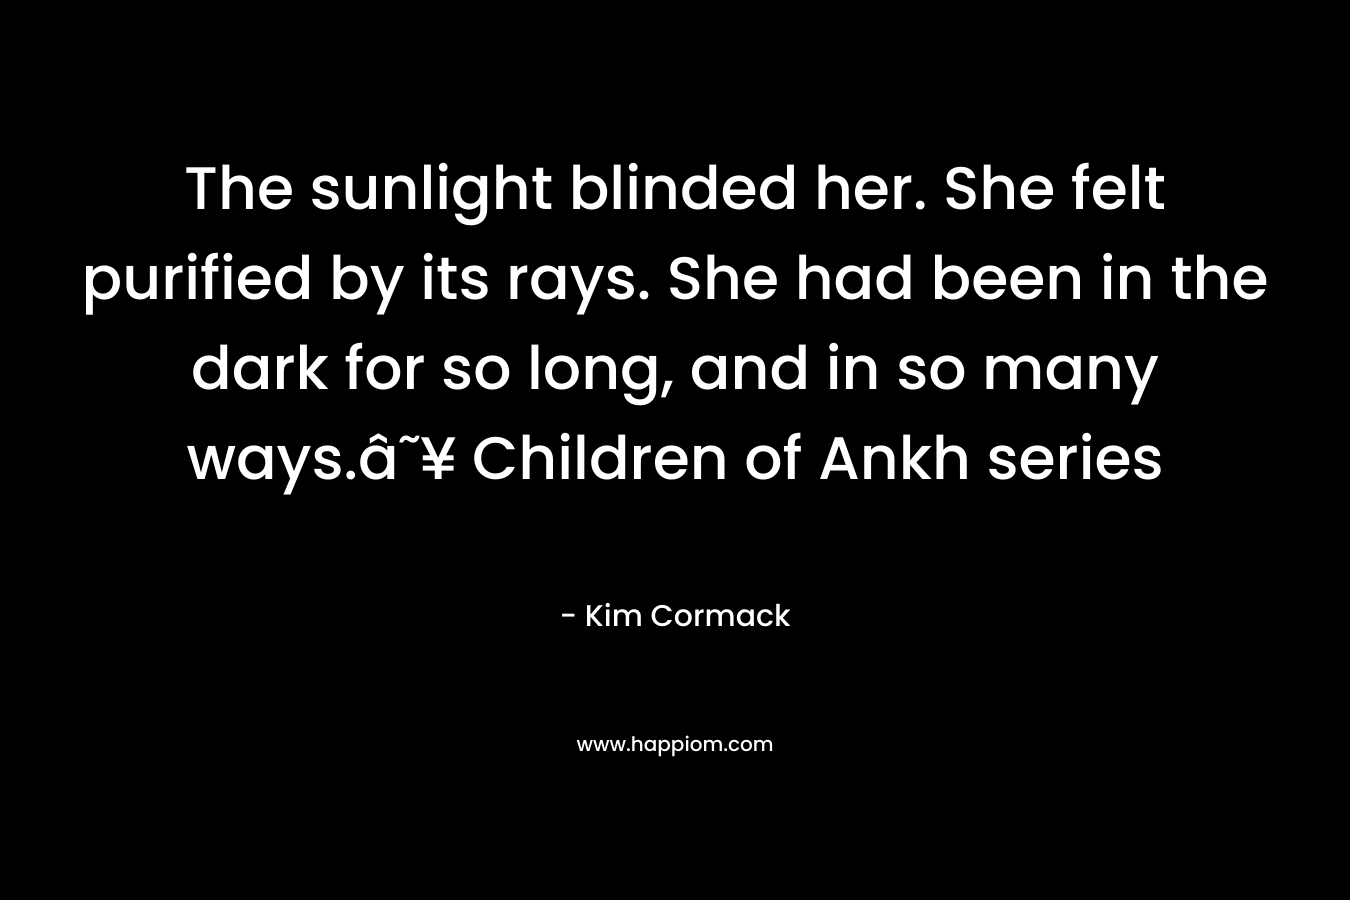 The sunlight blinded her. She felt purified by its rays. She had been in the dark for so long, and in so many ways.â˜¥ Children of Ankh series – Kim Cormack